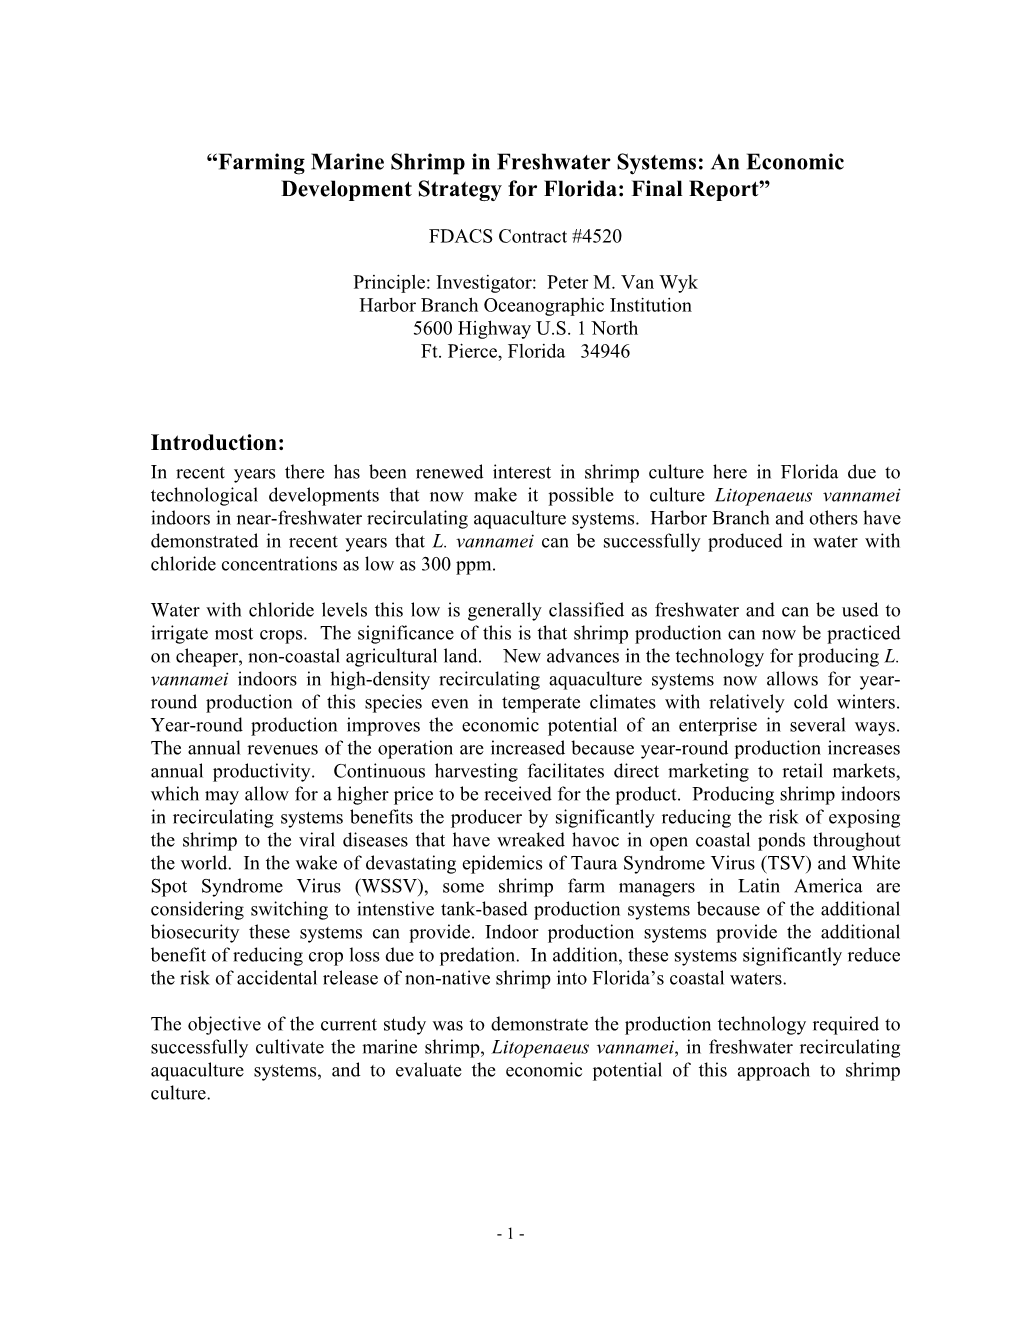 Farming Marine Shrimp in Freshwater Systems: an Economic Development Strategy for Florida: Final Report”